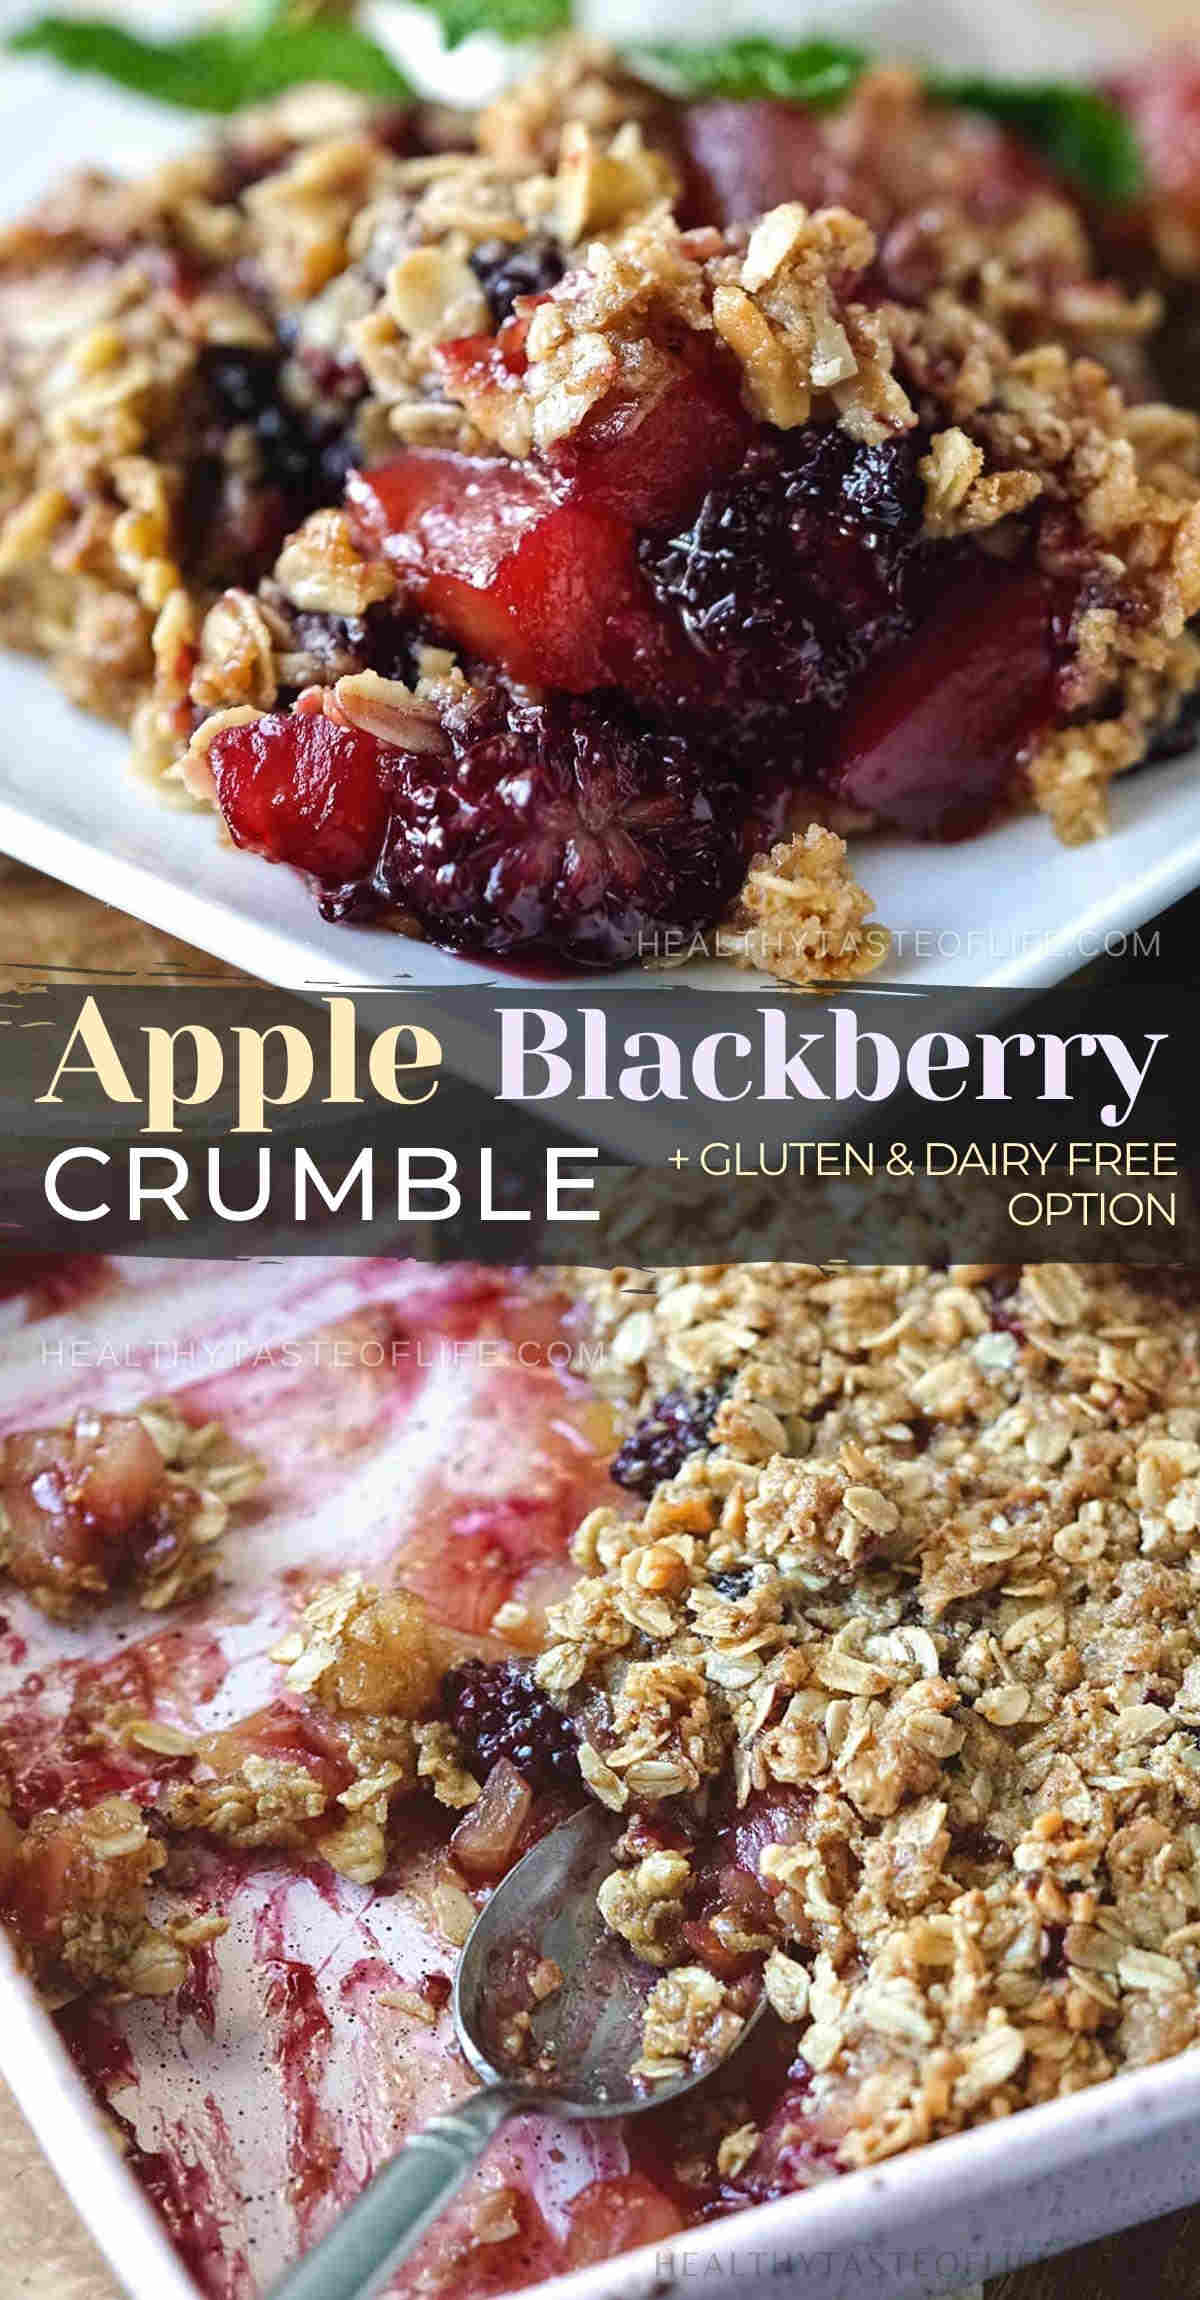 This blackberry and apple crumble recipe features freshly baked apples and blackberries topped with a crisp buttery oat crumble topping making an amazing easy blackberry dessert for your guests. Serve the apple and blackberry crumble warm as it is or cold. Customize the apple blackberry crumble with healthy ingredients and make it vegan or gluten free. #appleandblackberrycrumble #blackberryandapplecrumble #appleblackberrycrumble #appleblackberrycrisp #blackberryapplecrisp